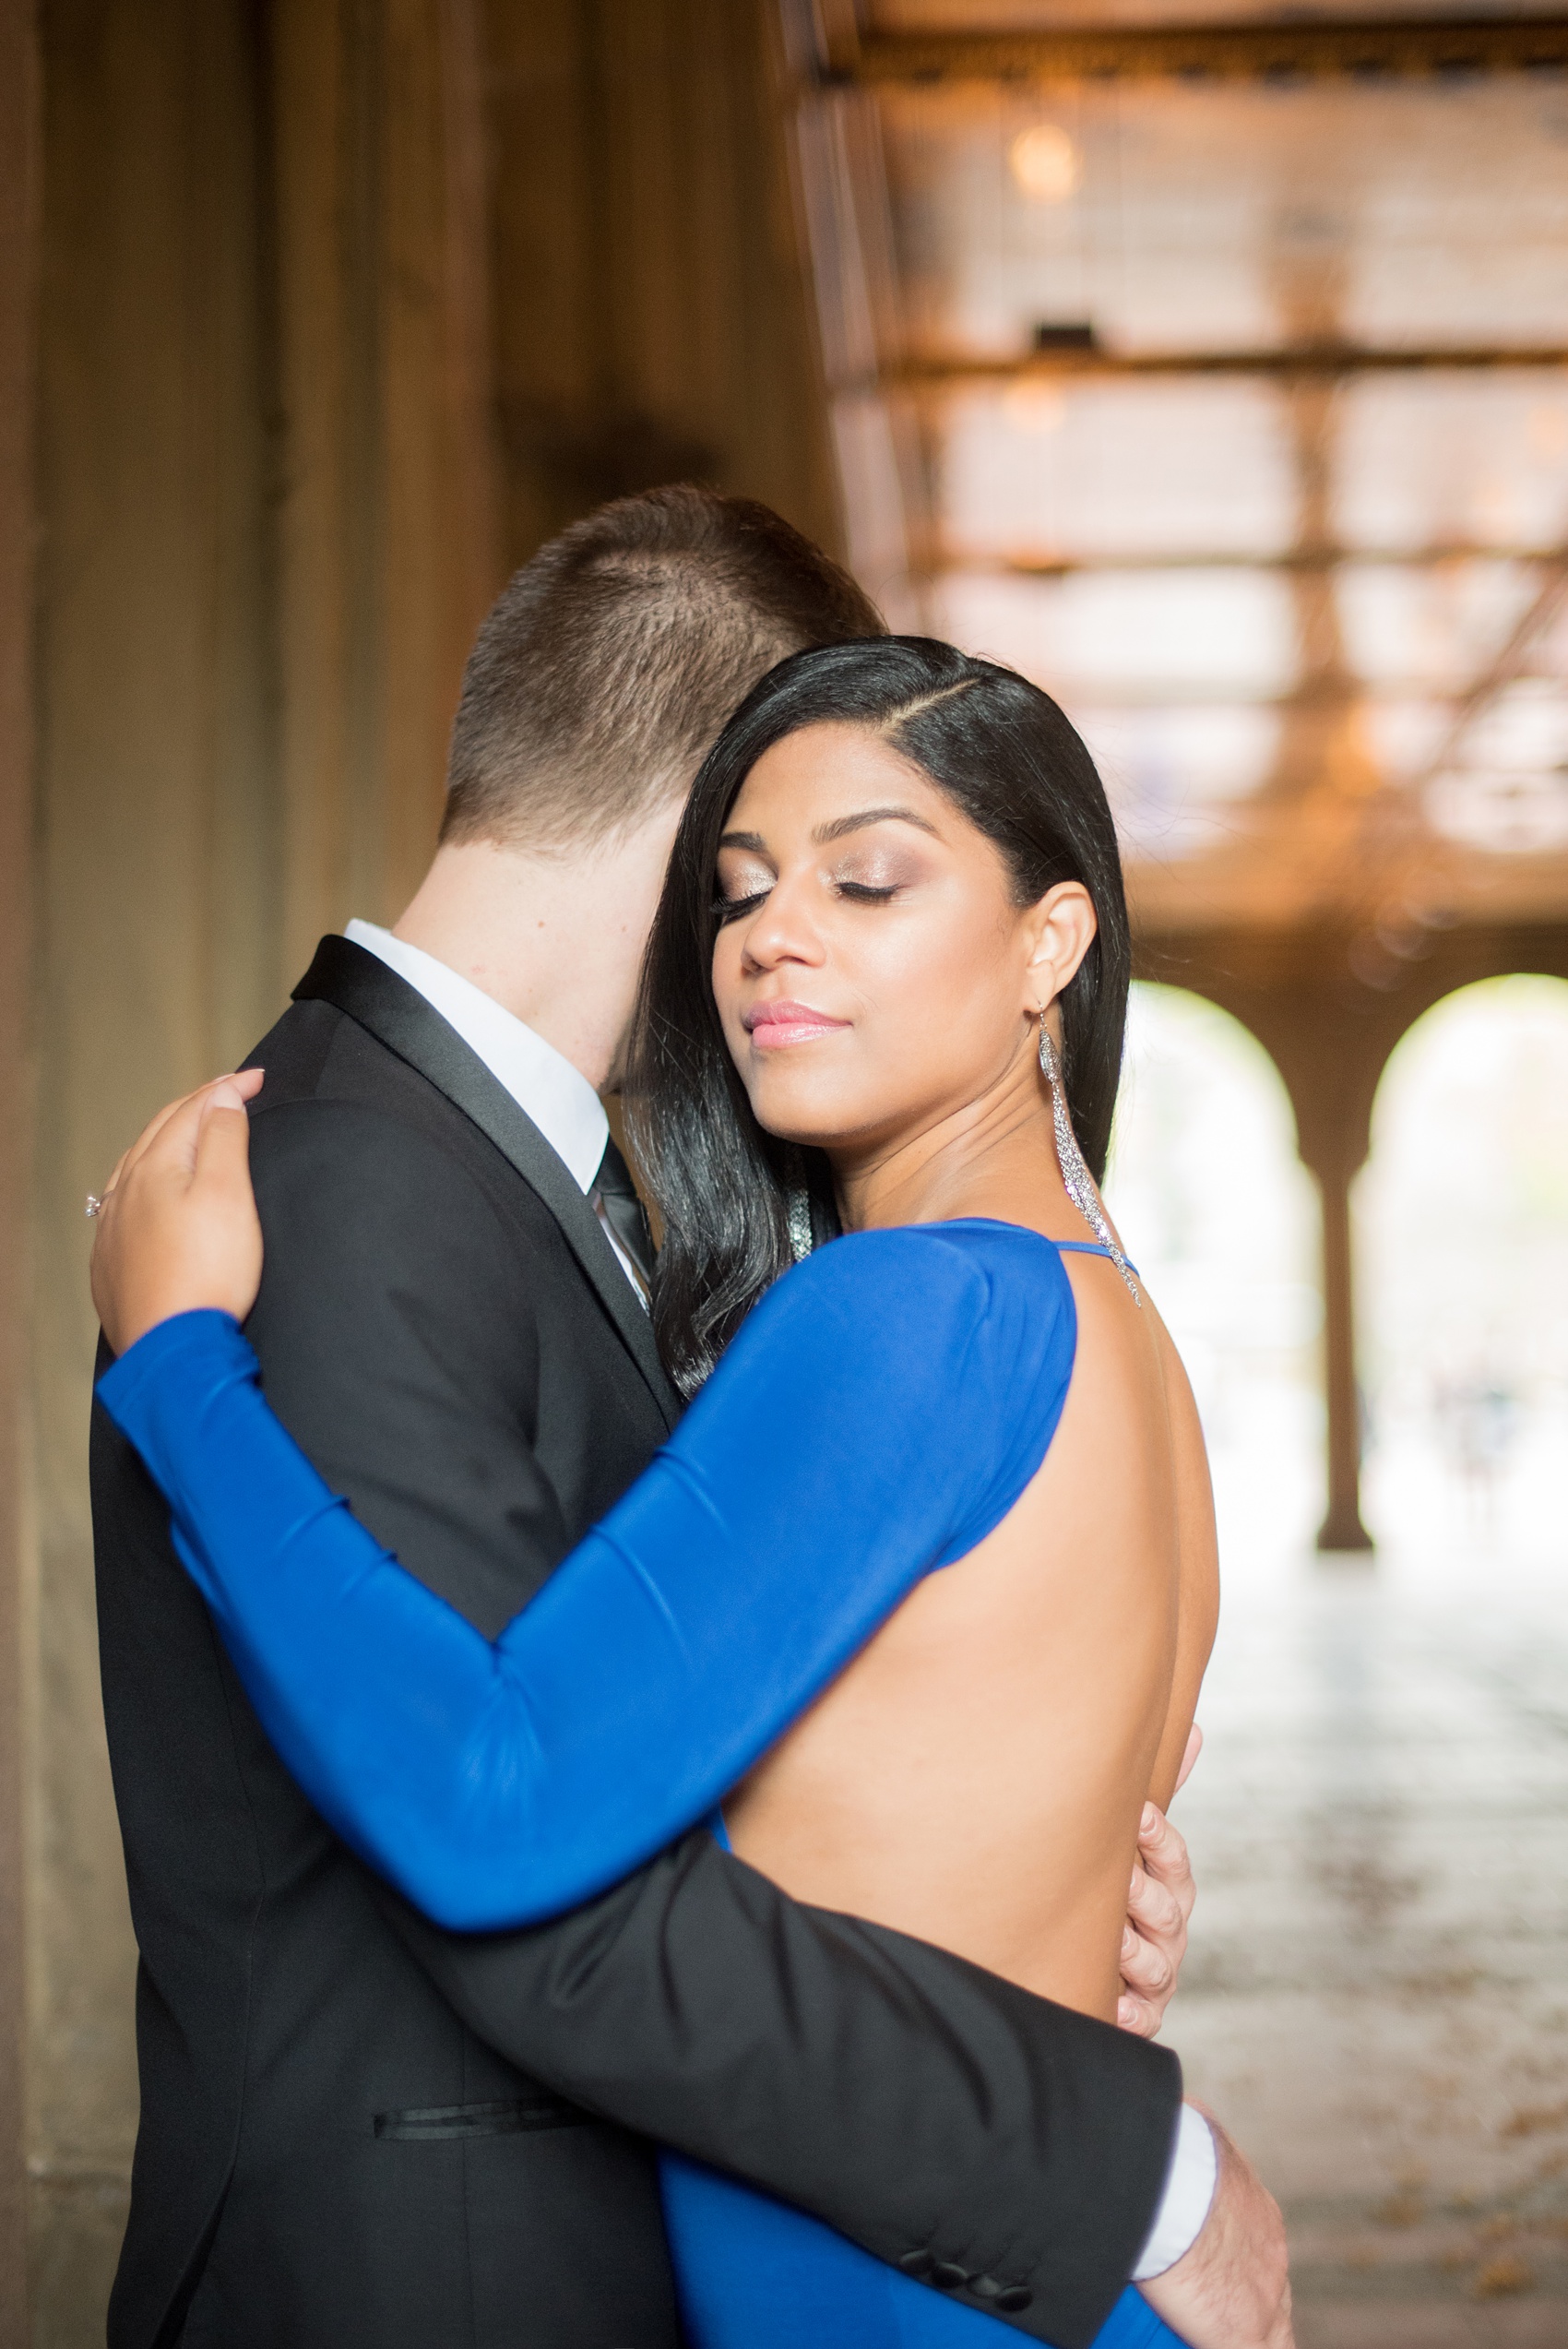 Mikkel Paige Photography pictures of an engagement session in Central Park. The bride wore a sexy back cobalt blue dress for a photo by Bethesda Terrace.